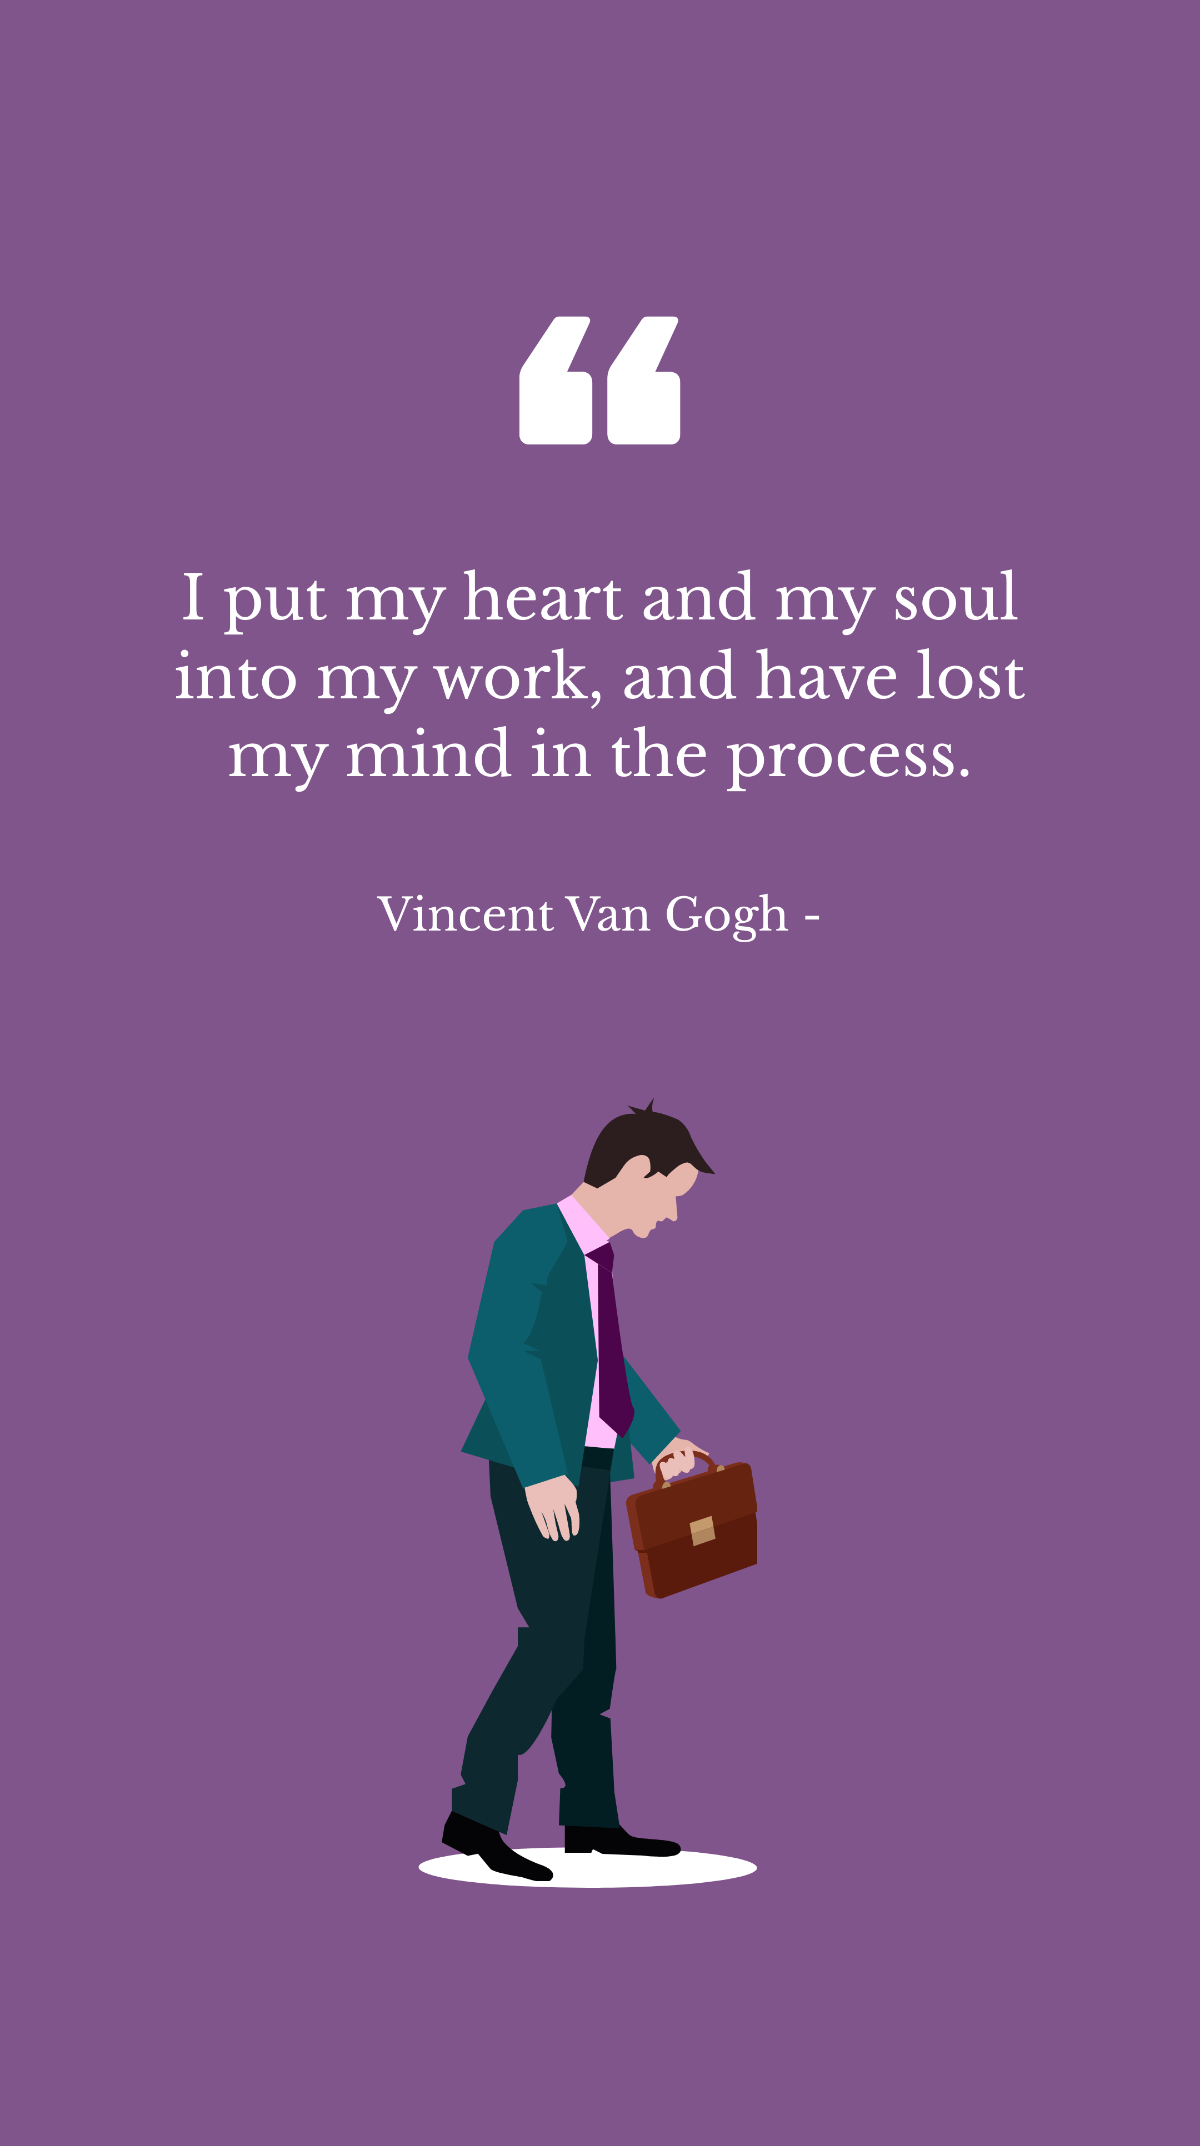 Vincent Van Gogh - I put my heart and my soul into my work, and have lost my mind in the process.